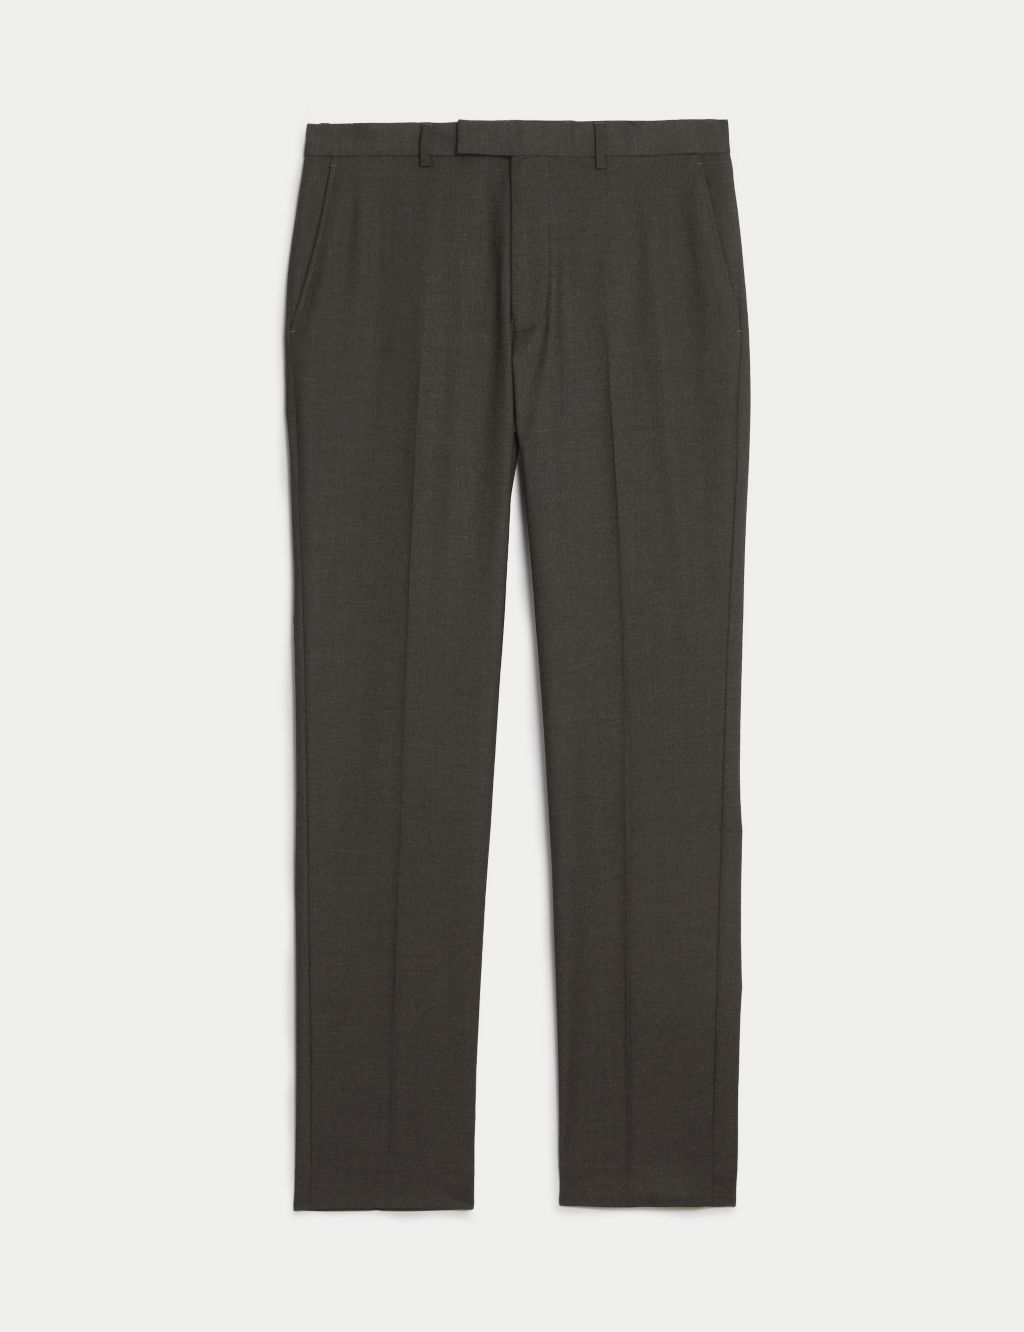 Slim Fit Stretch Suit Trousers image 2